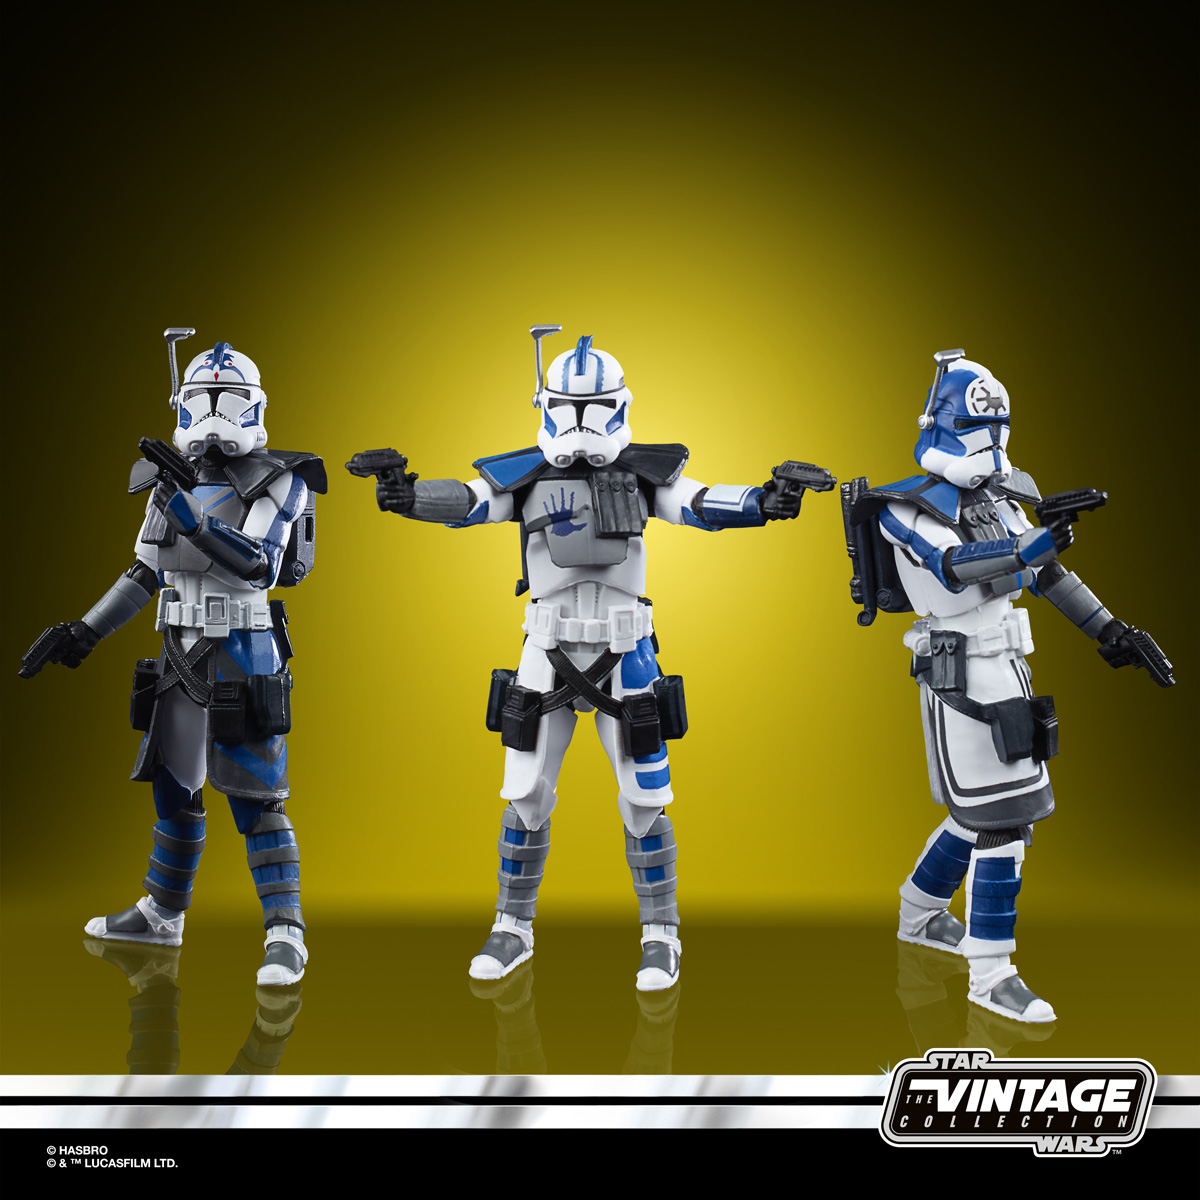 Star Wars The Vintage Collection Star Wars The Clone Wars 501st Legion Arc Troopers Figure 3 Pack Oop 2